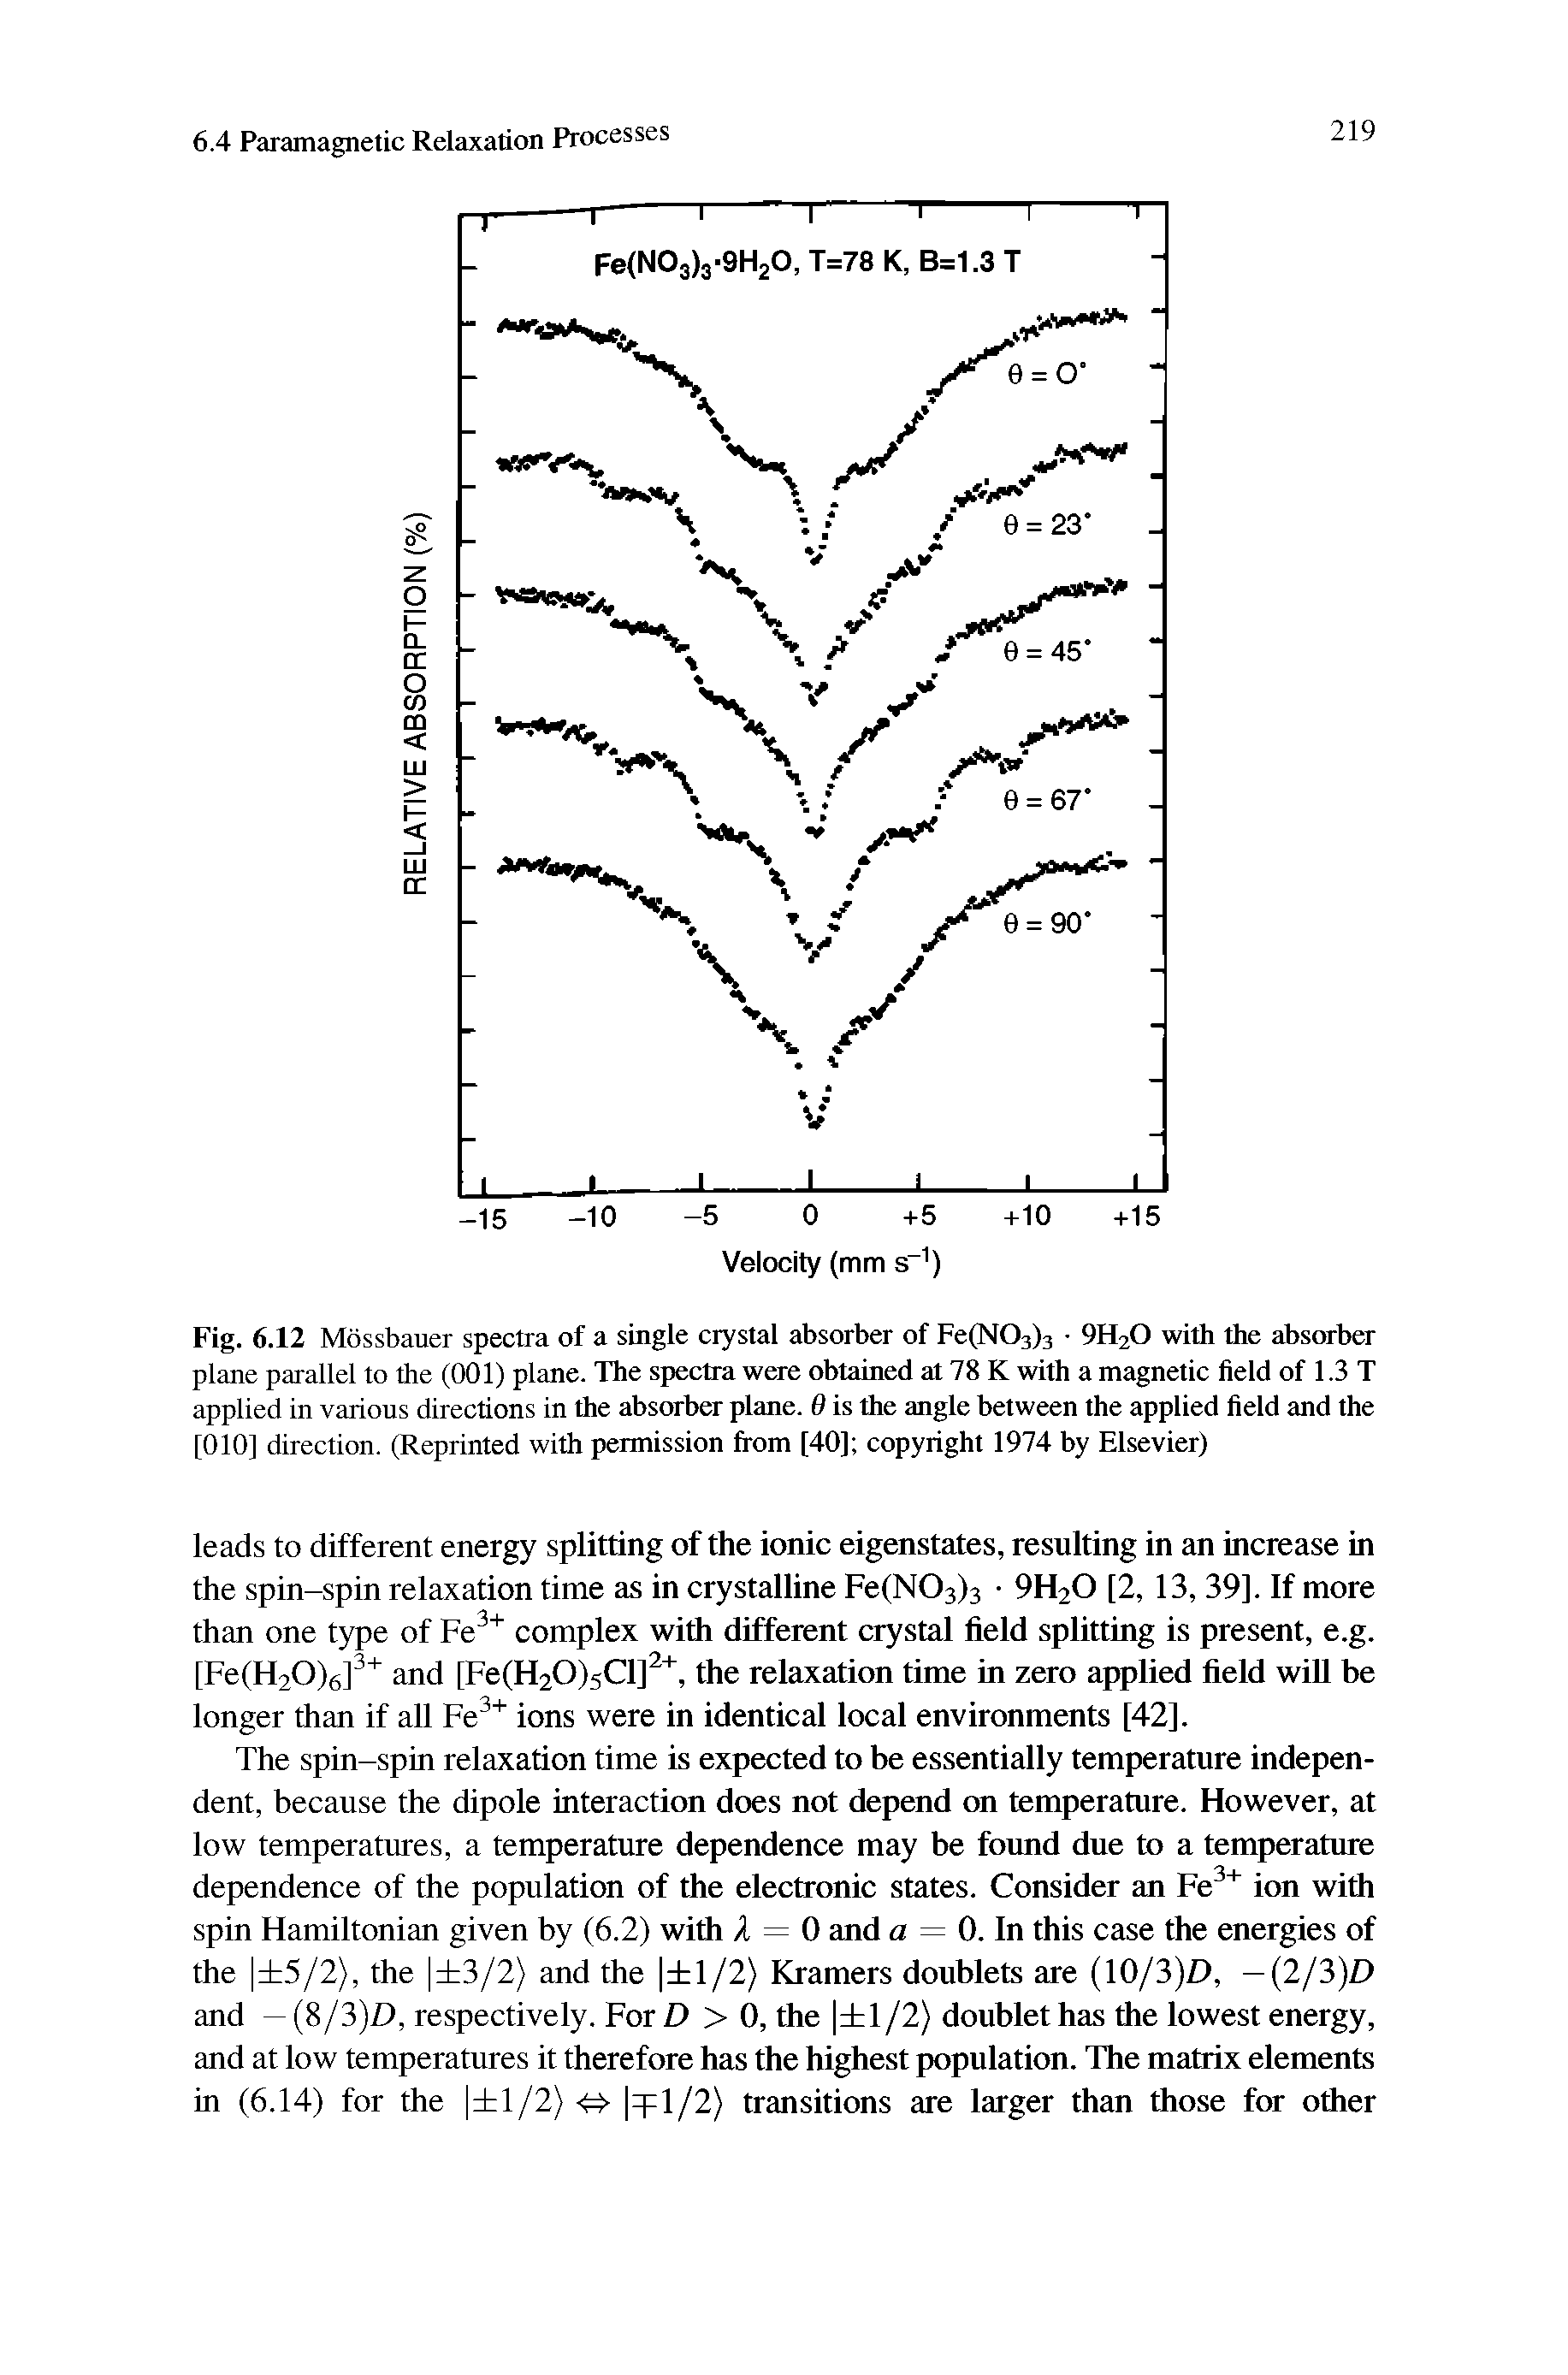 Fig. 6.12 Mossbauer spectra of a single crystal absorber of Fe(N03)3 9H2O with the absorber plane parallel to the (001) plane. The spectra were obtained at 78 K with a magnetic field of 1.3 T applied in various directions in the absorber plane. B is the angle between the applied field and the [010] direction. (Reprinted with permission from [40] copyright 1974 by Elsevier)...